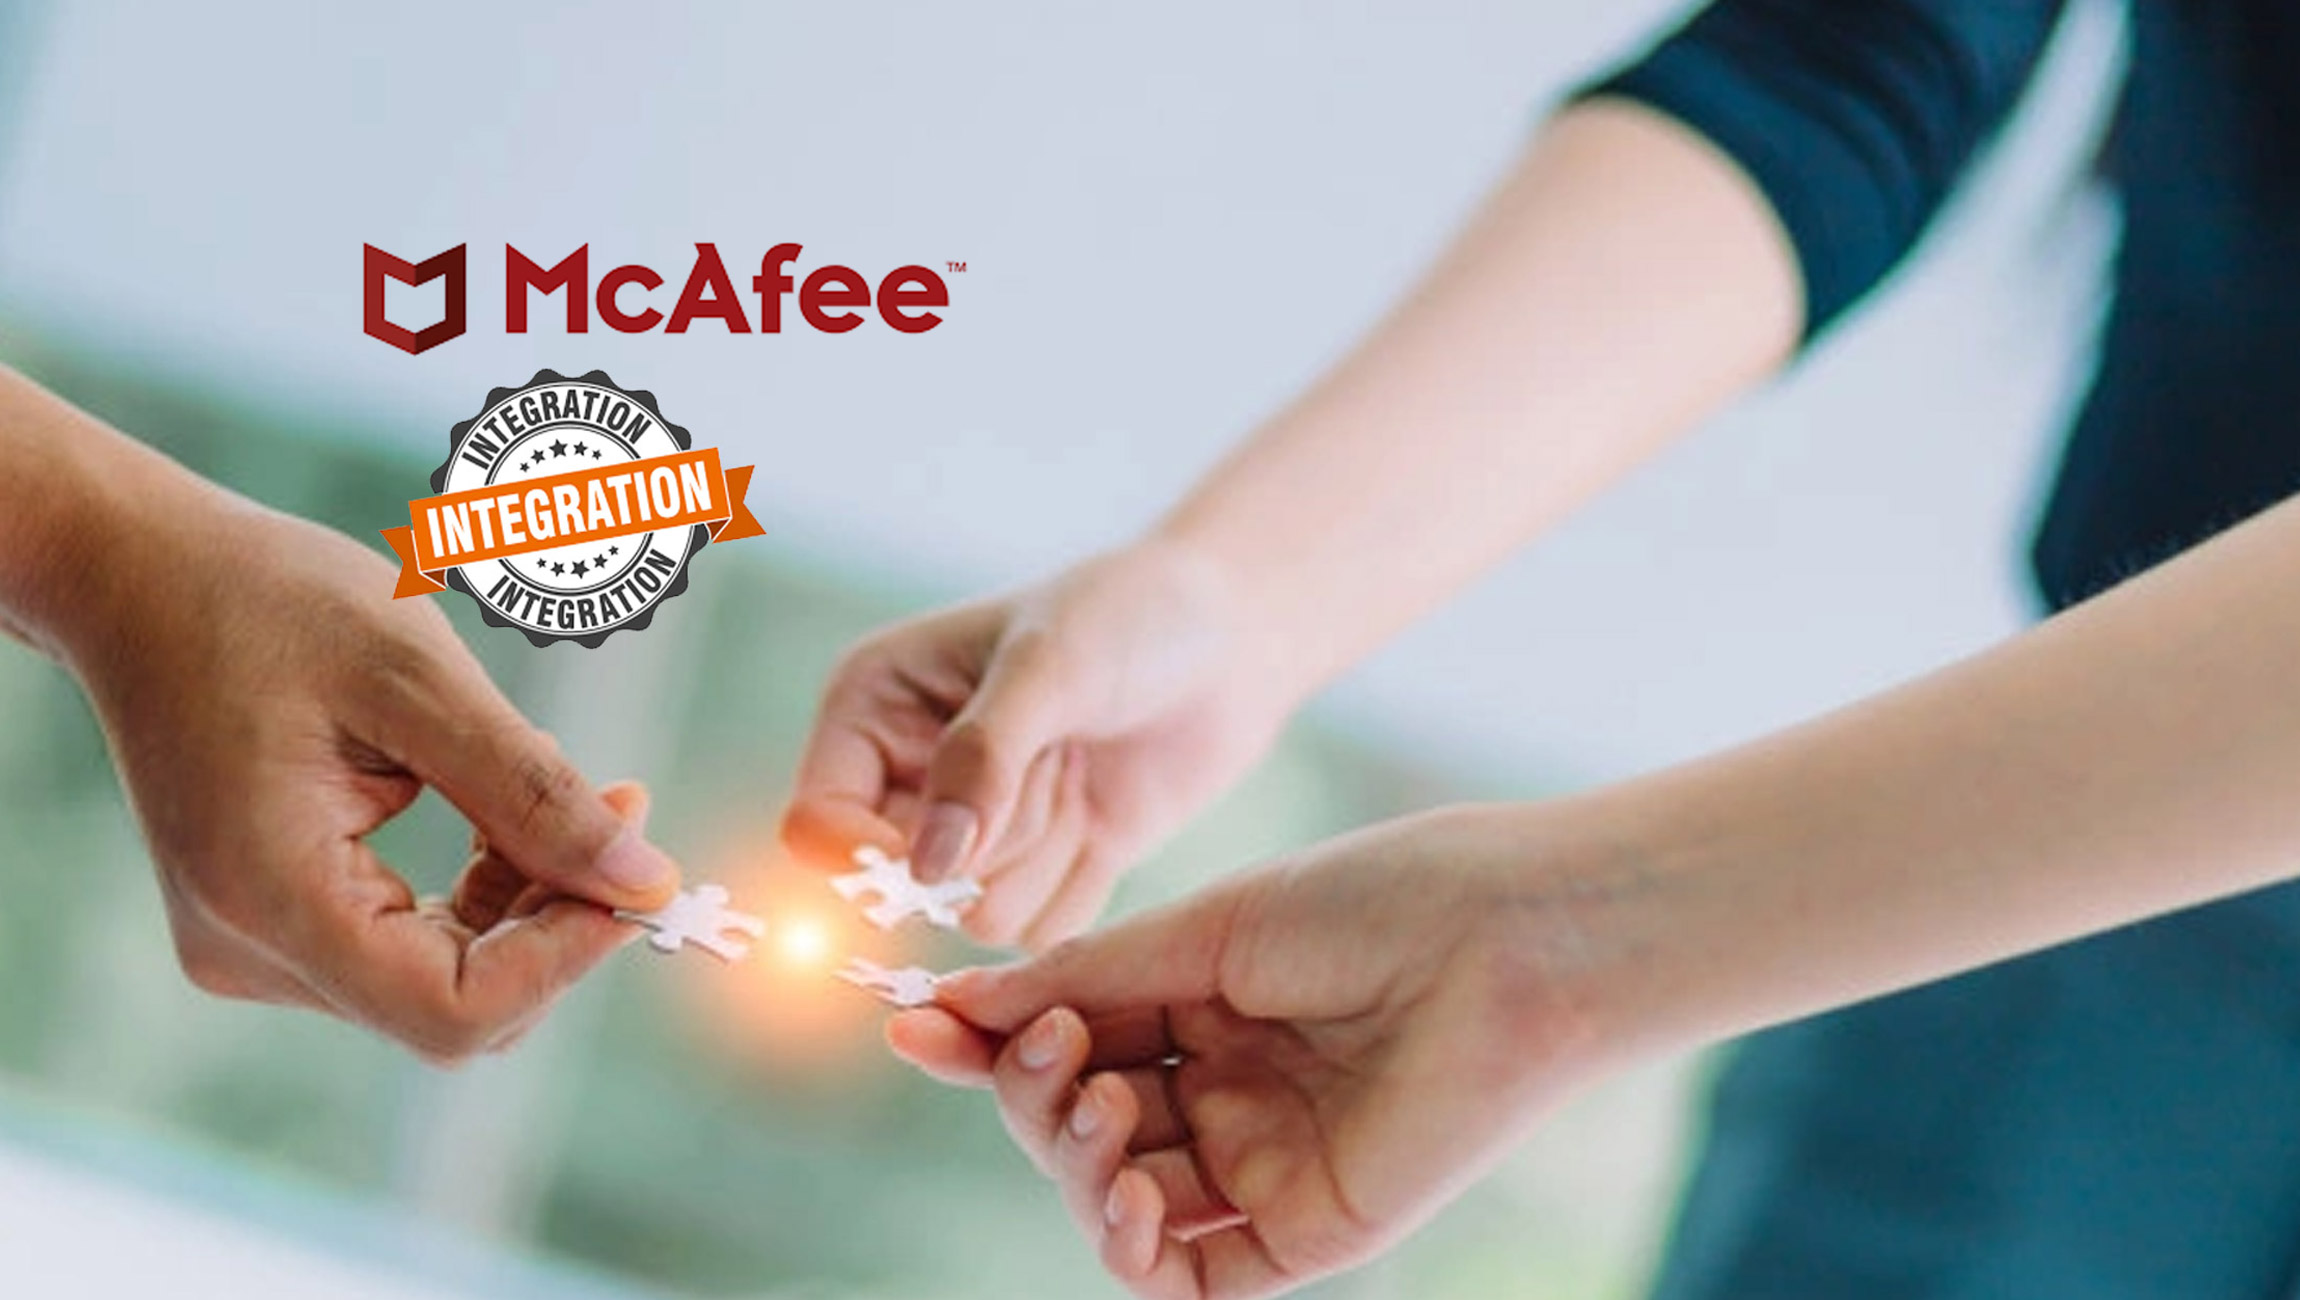 Combination of McAfee Enterprise and FireEye Complete